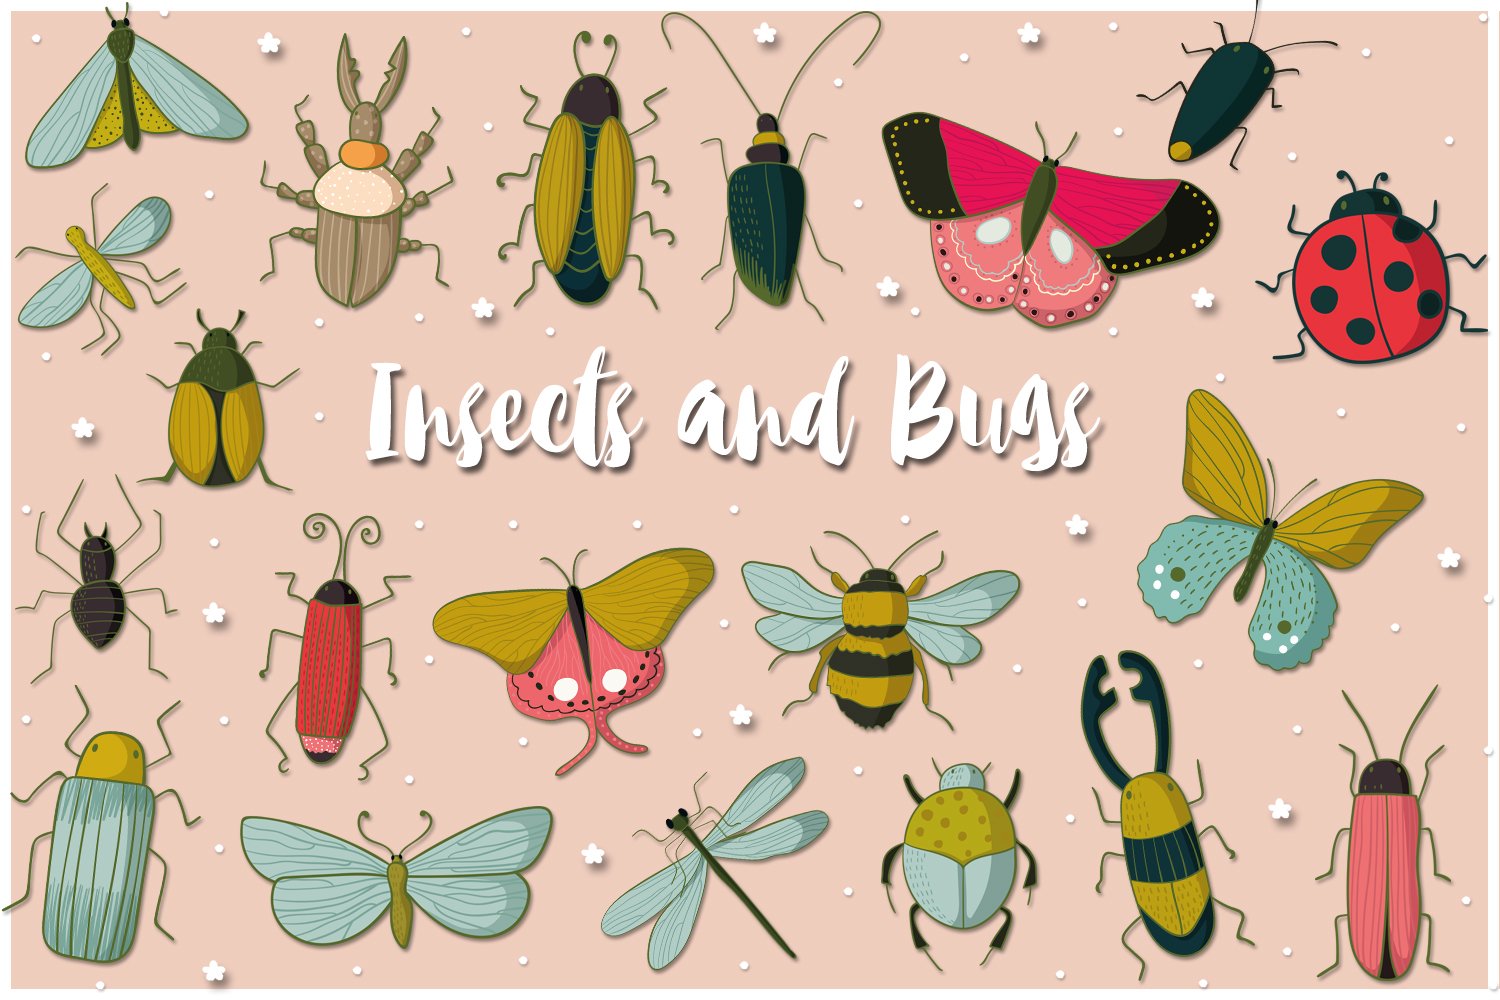 Insects and Bugs cover image.